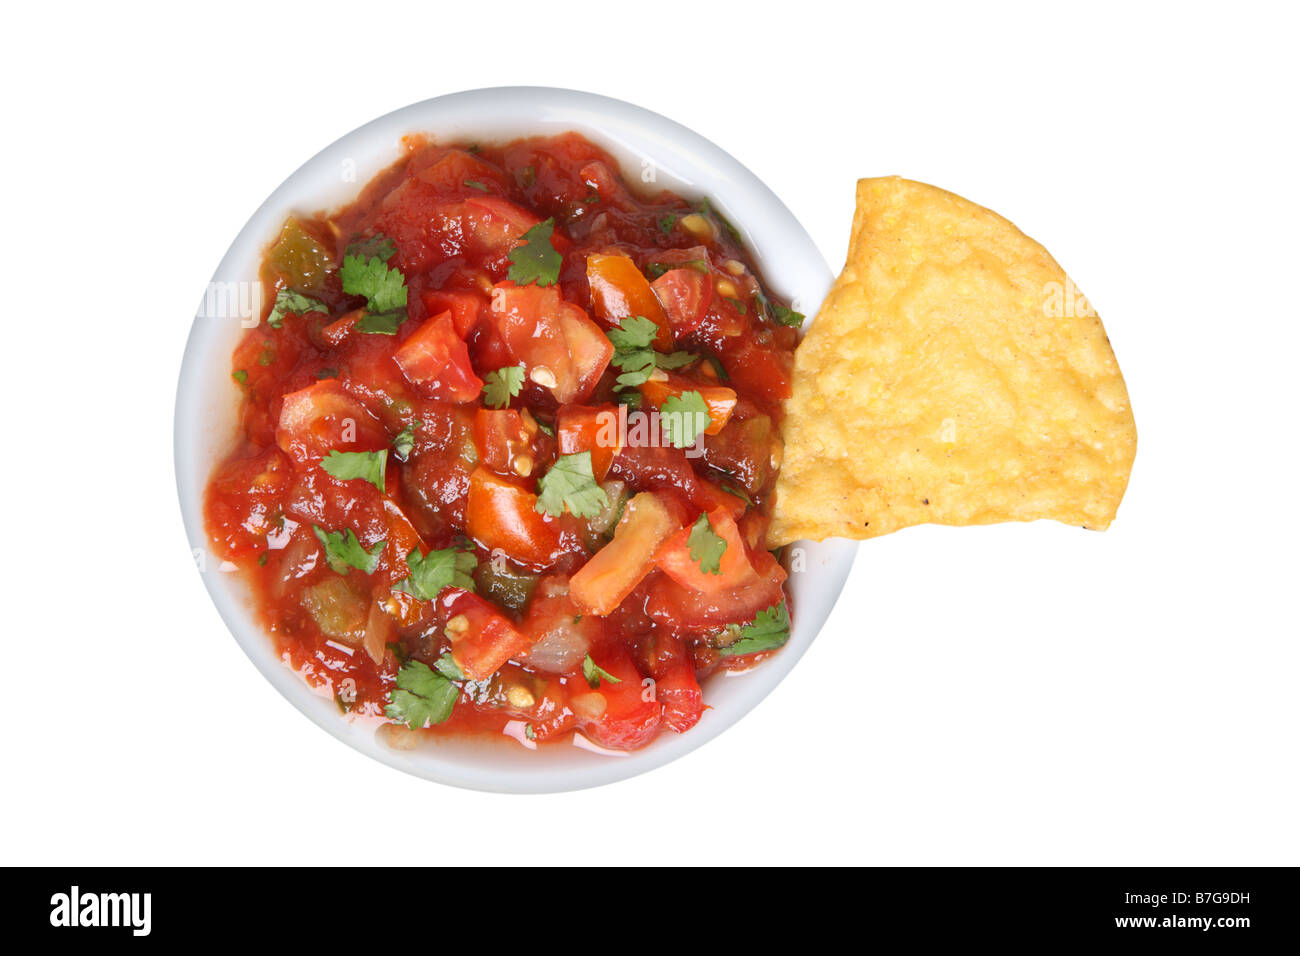 Salsa and tortilla chip cut out on white background Stock Photo